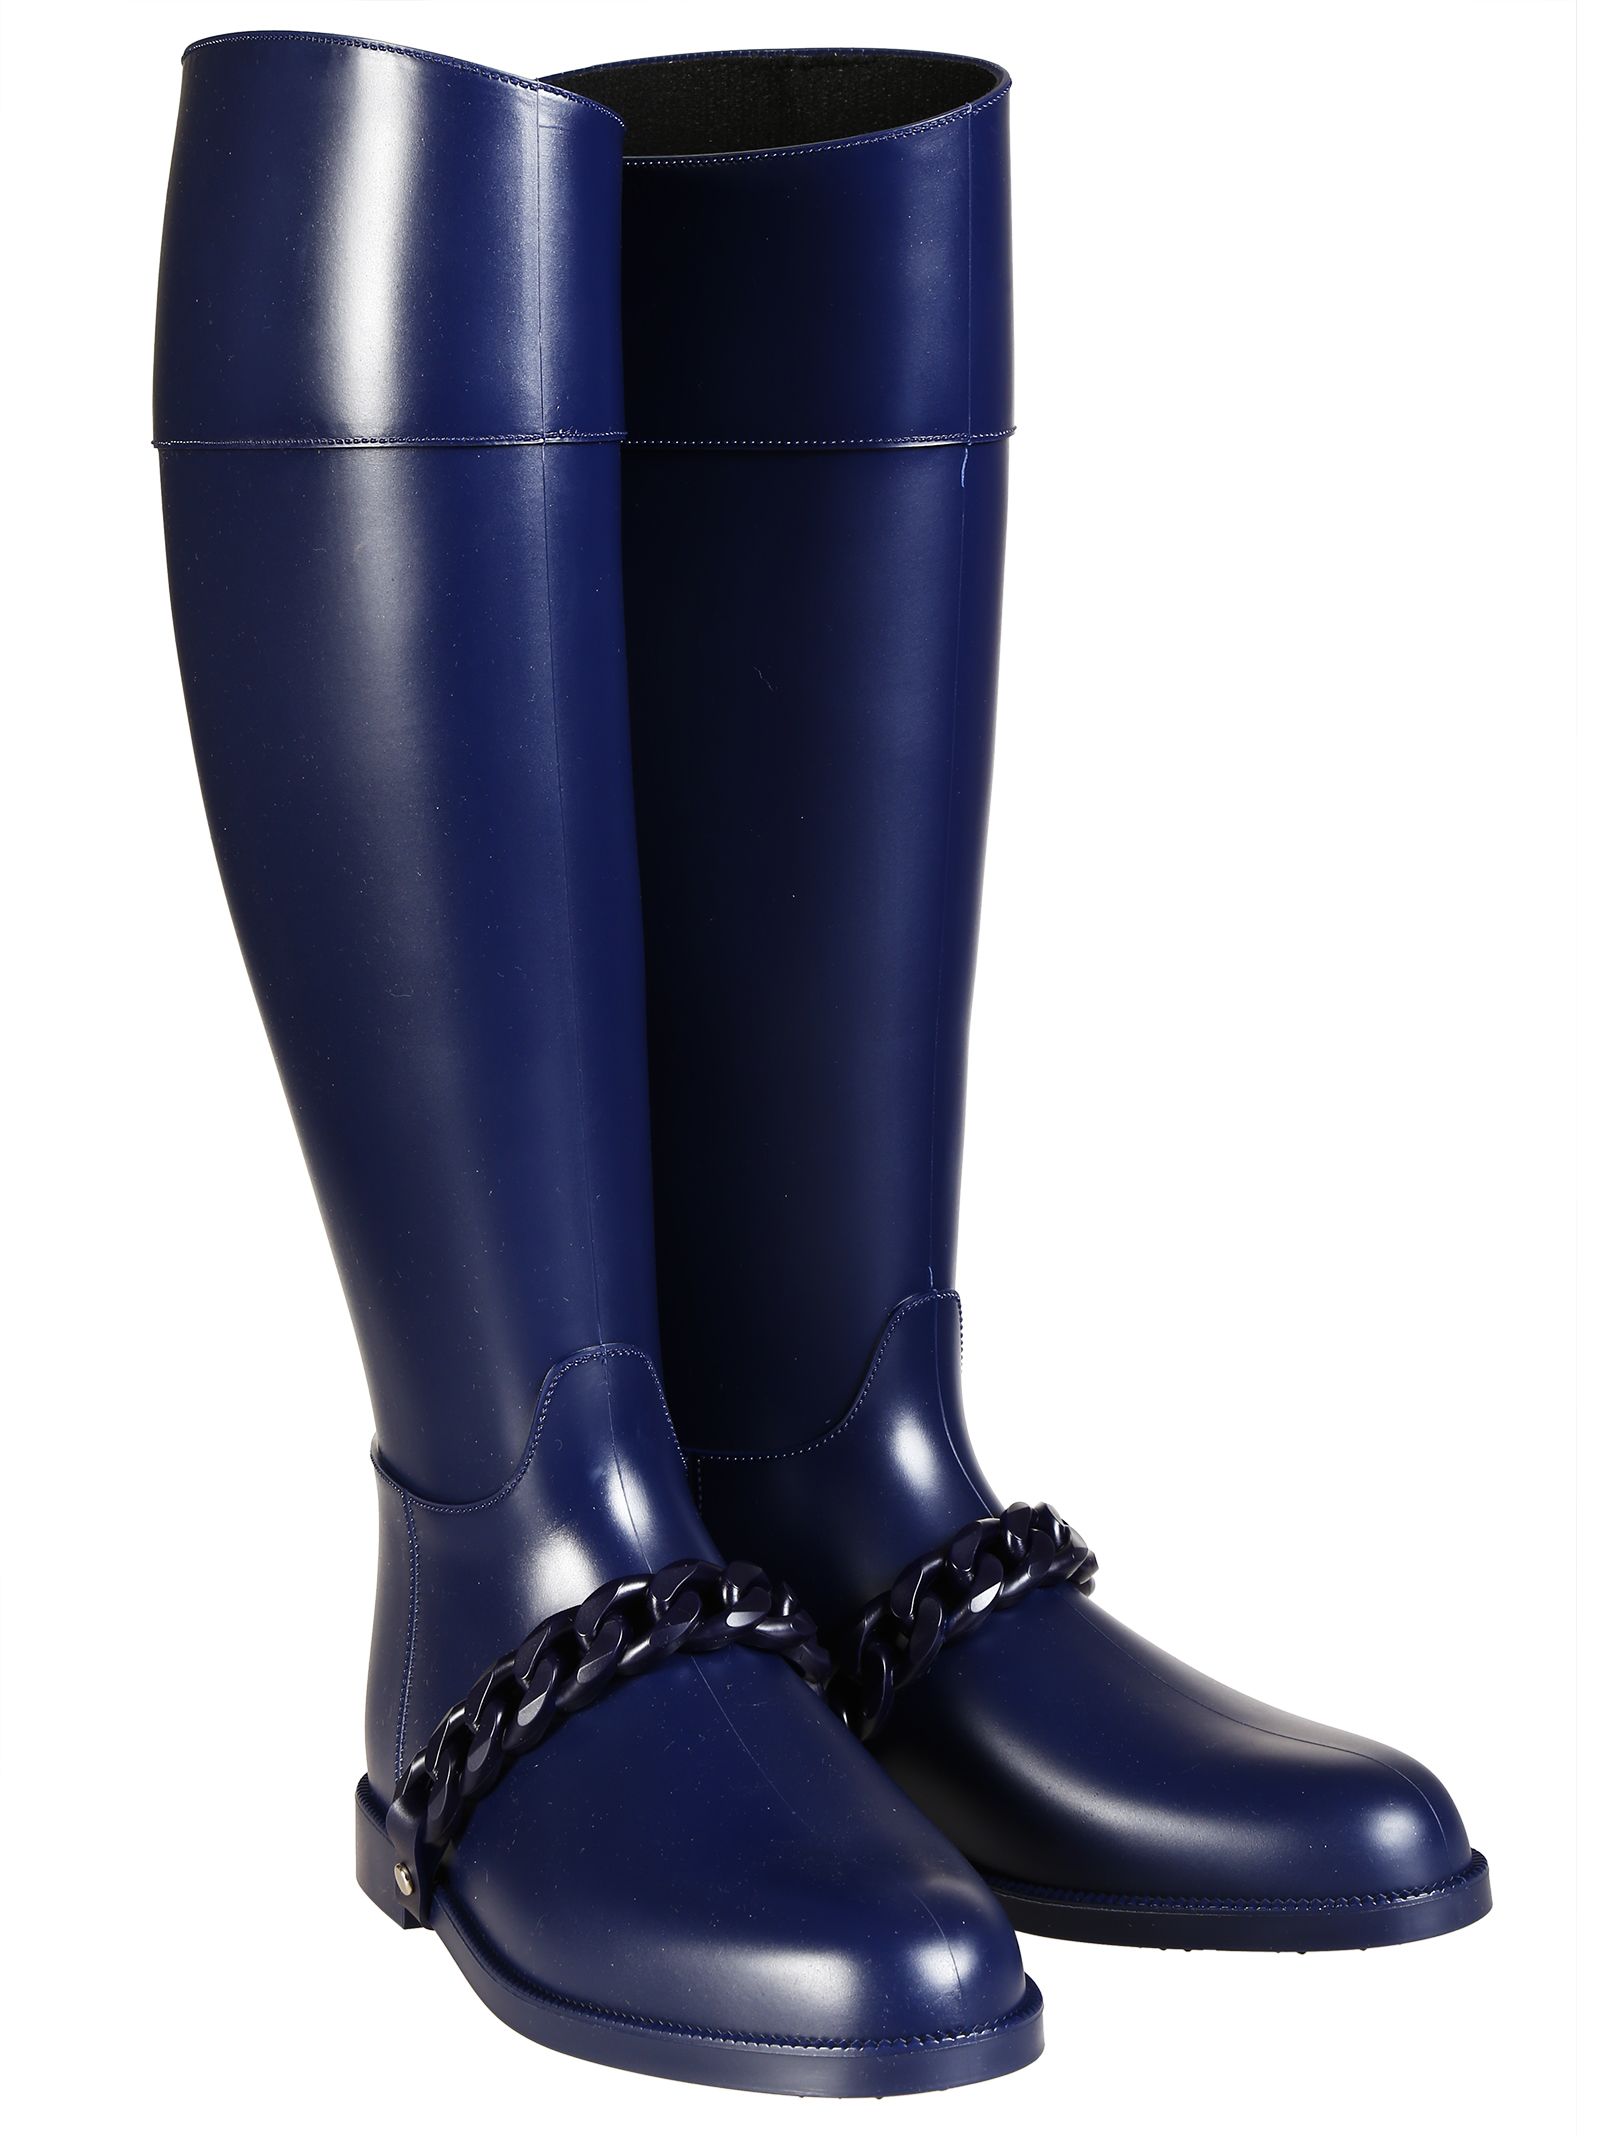 Givenchy Rain Boots Green | The Art of 